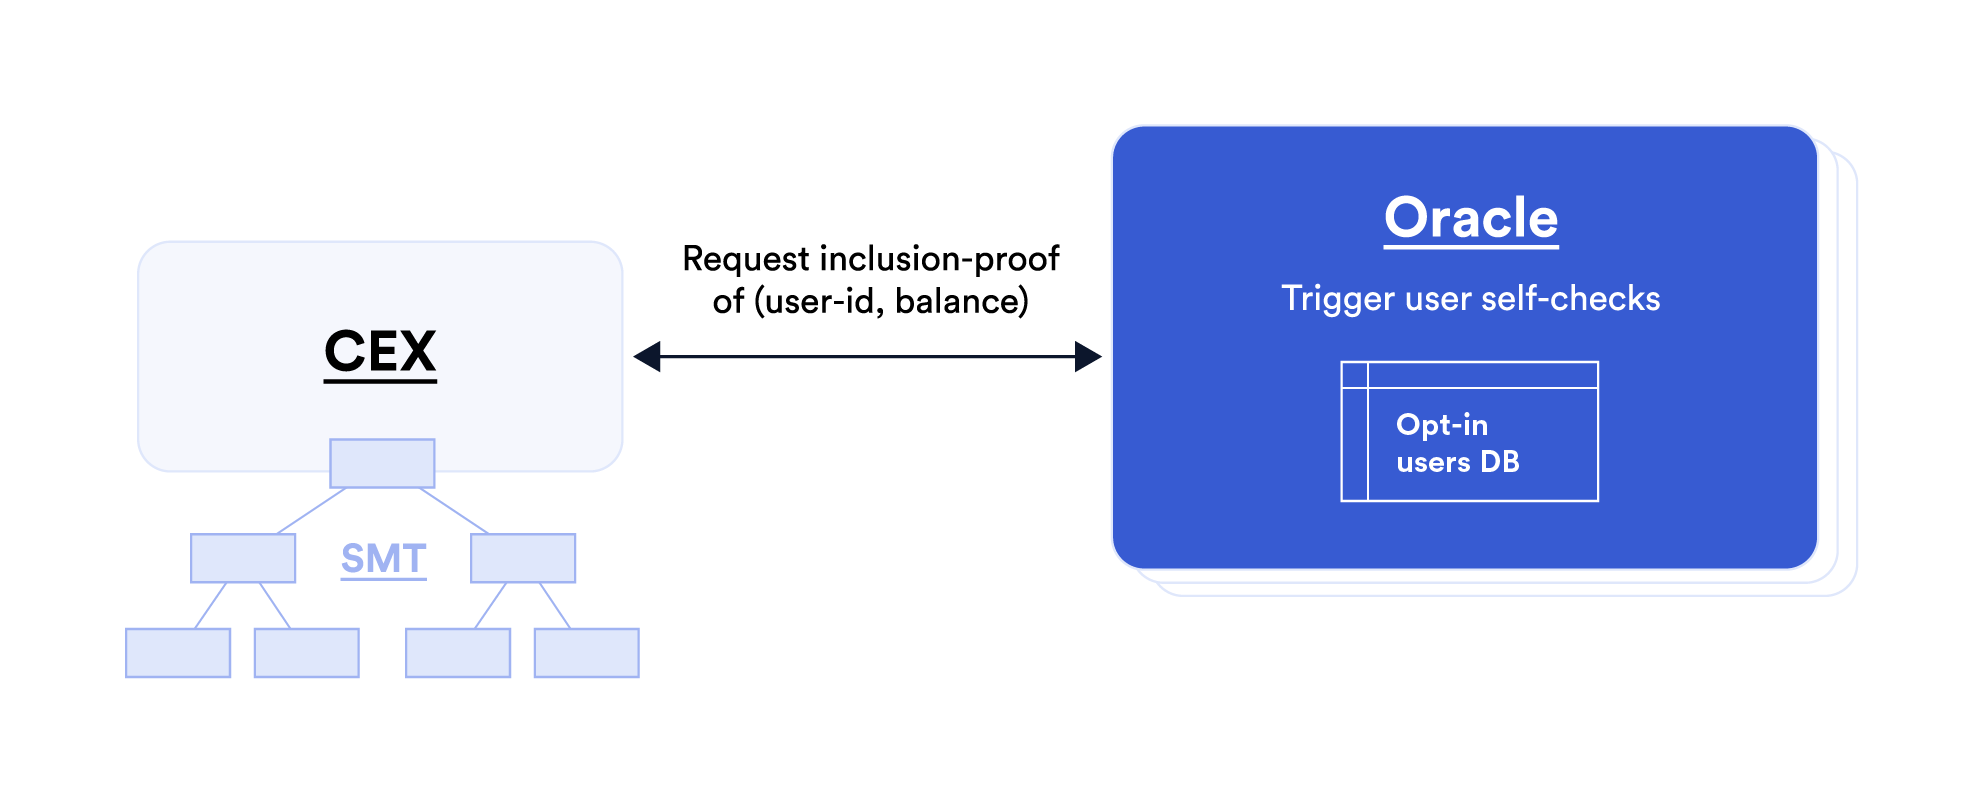 A diagram showing how oracles can automate the triggering of self-checks on behalf of end users. 